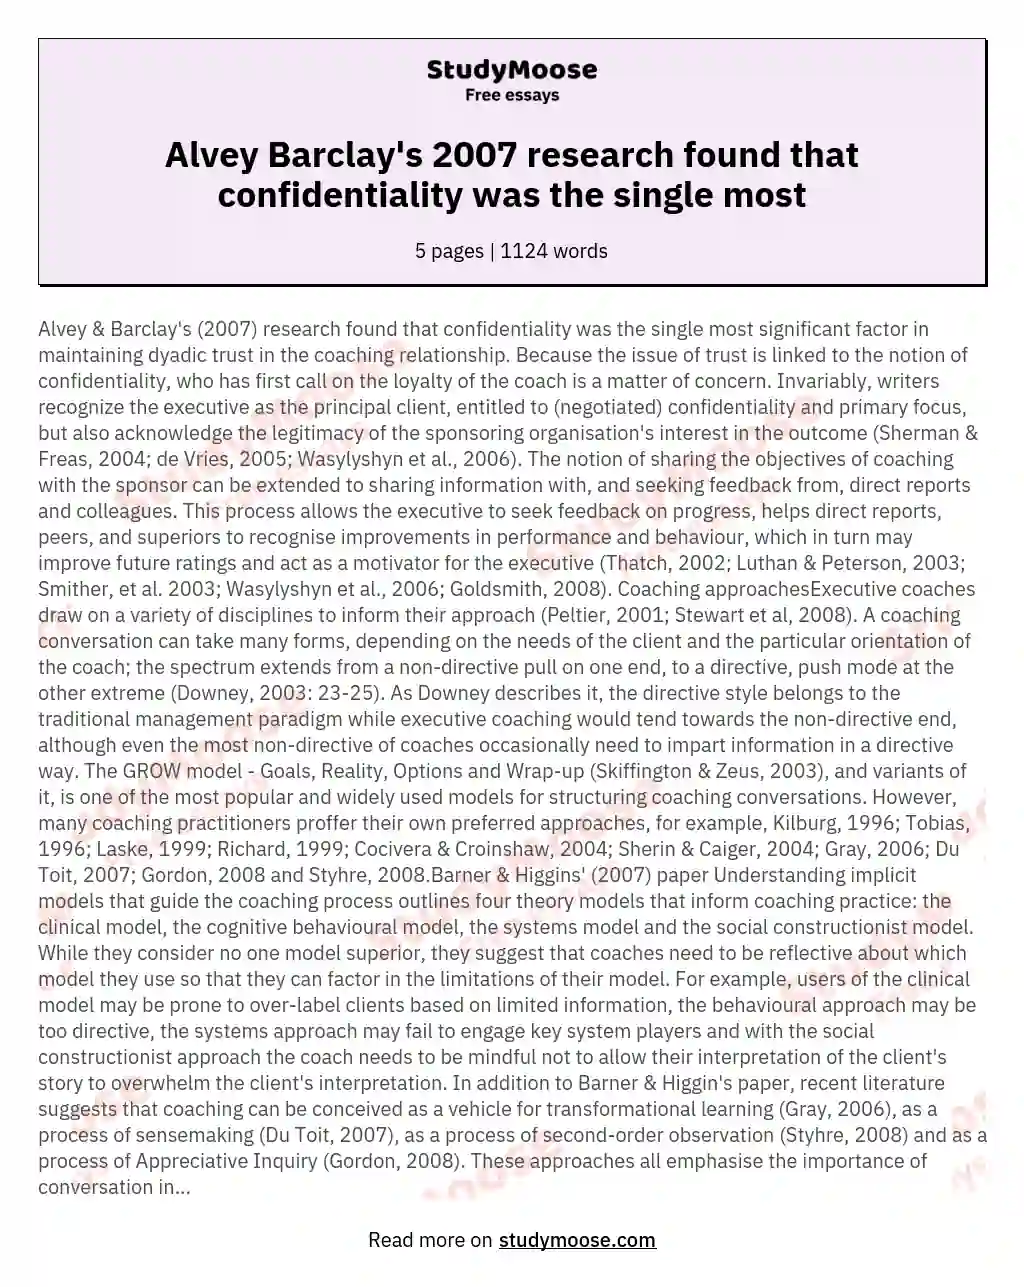 Alvey Barclay's 2007 research found that confidentiality was the single most